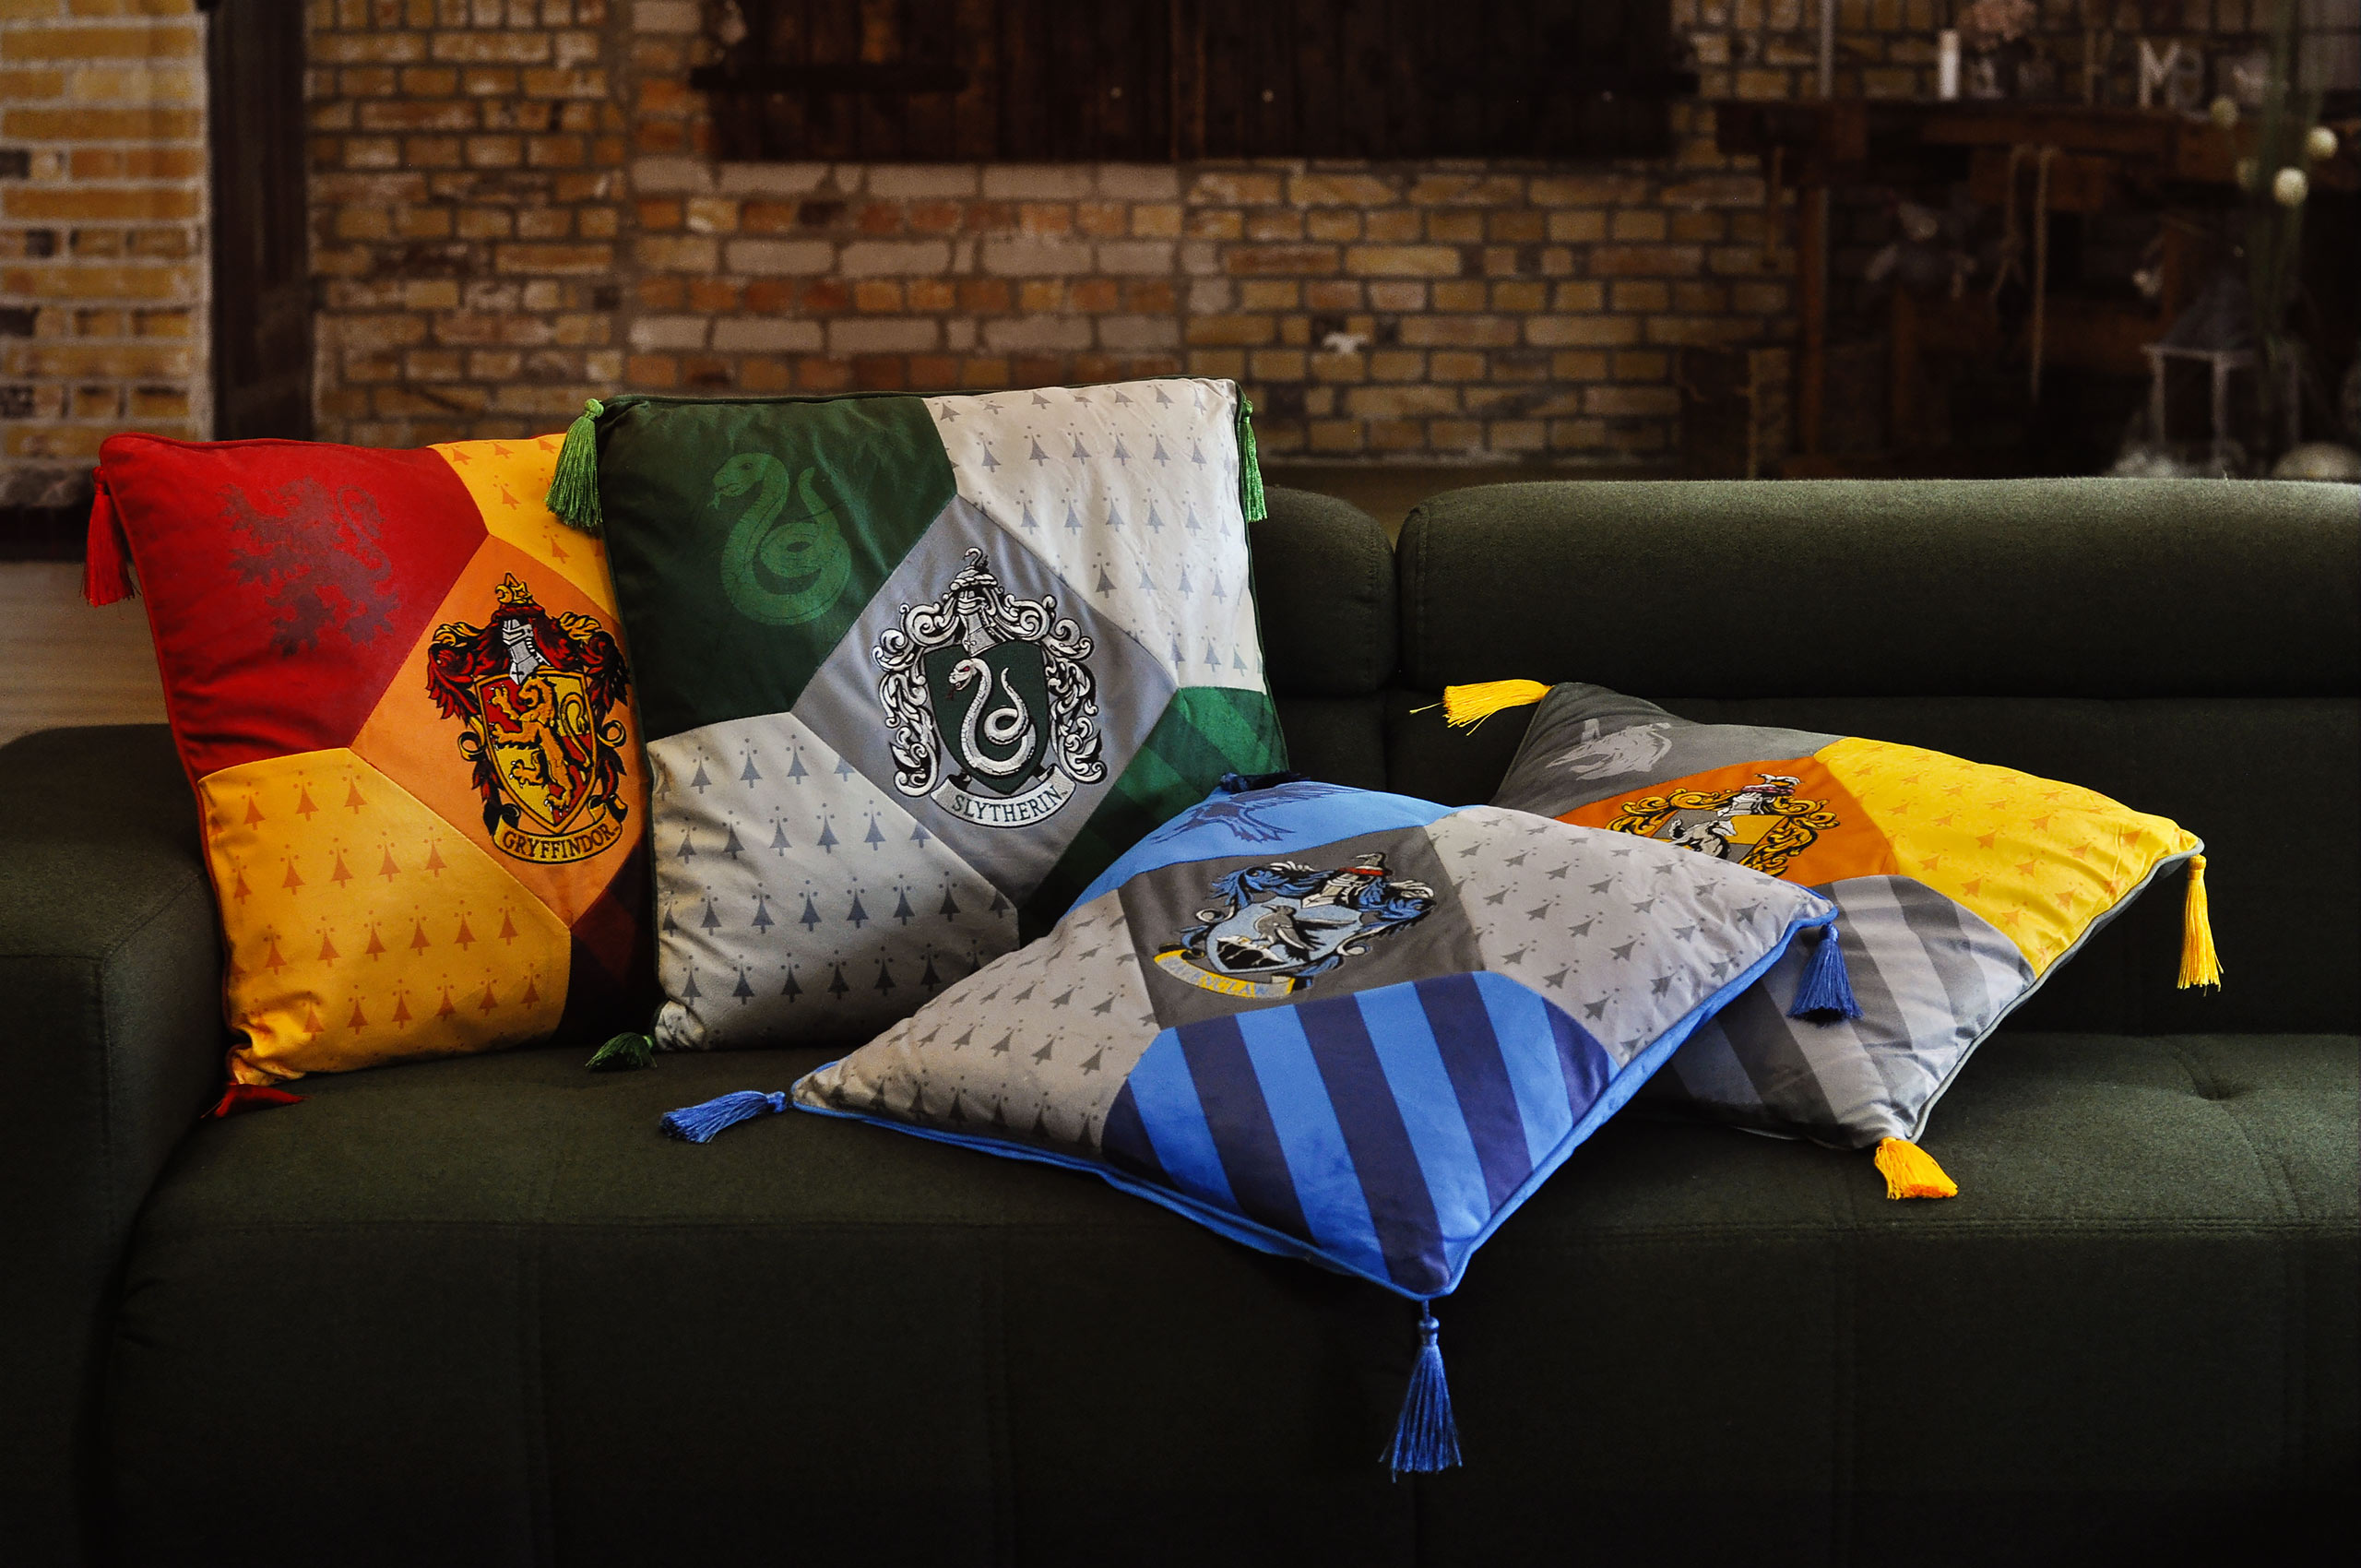 Harry Potter - Slytherin Deluxe Cushion with Tassels